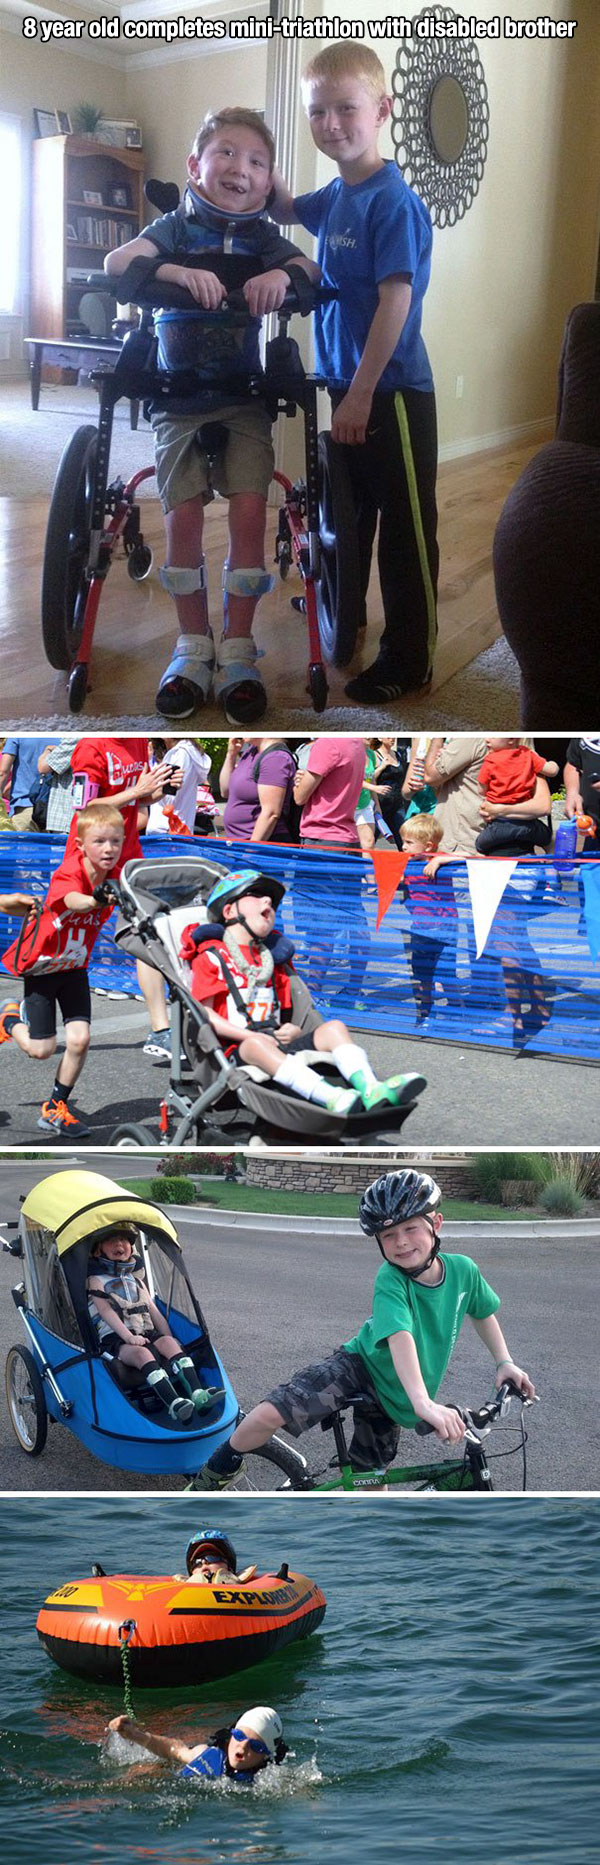 kids who will restore your faith in humanity - 8 year old completes minitriathlon with disabled brother Expanna